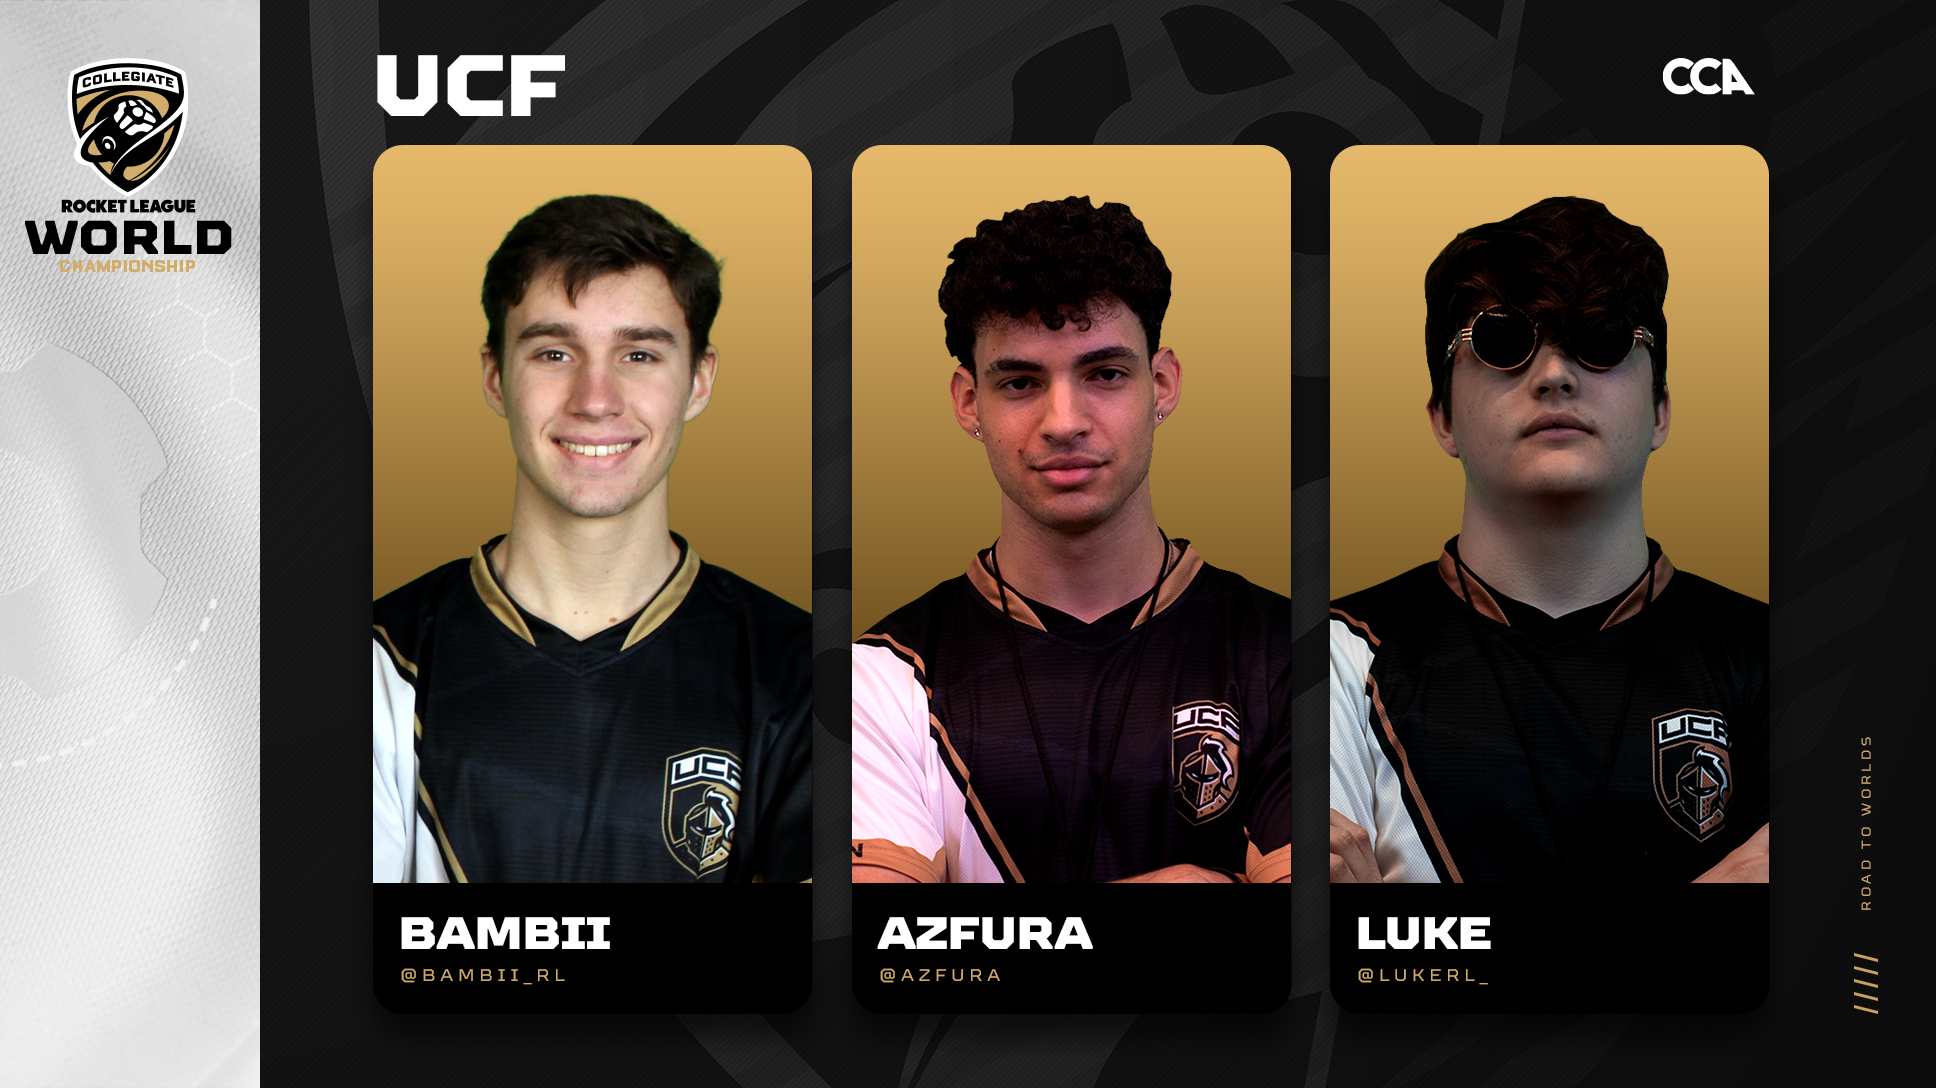 University of Central Florida Road to Worlds header with images of Bambii, Azfura, and Luke.